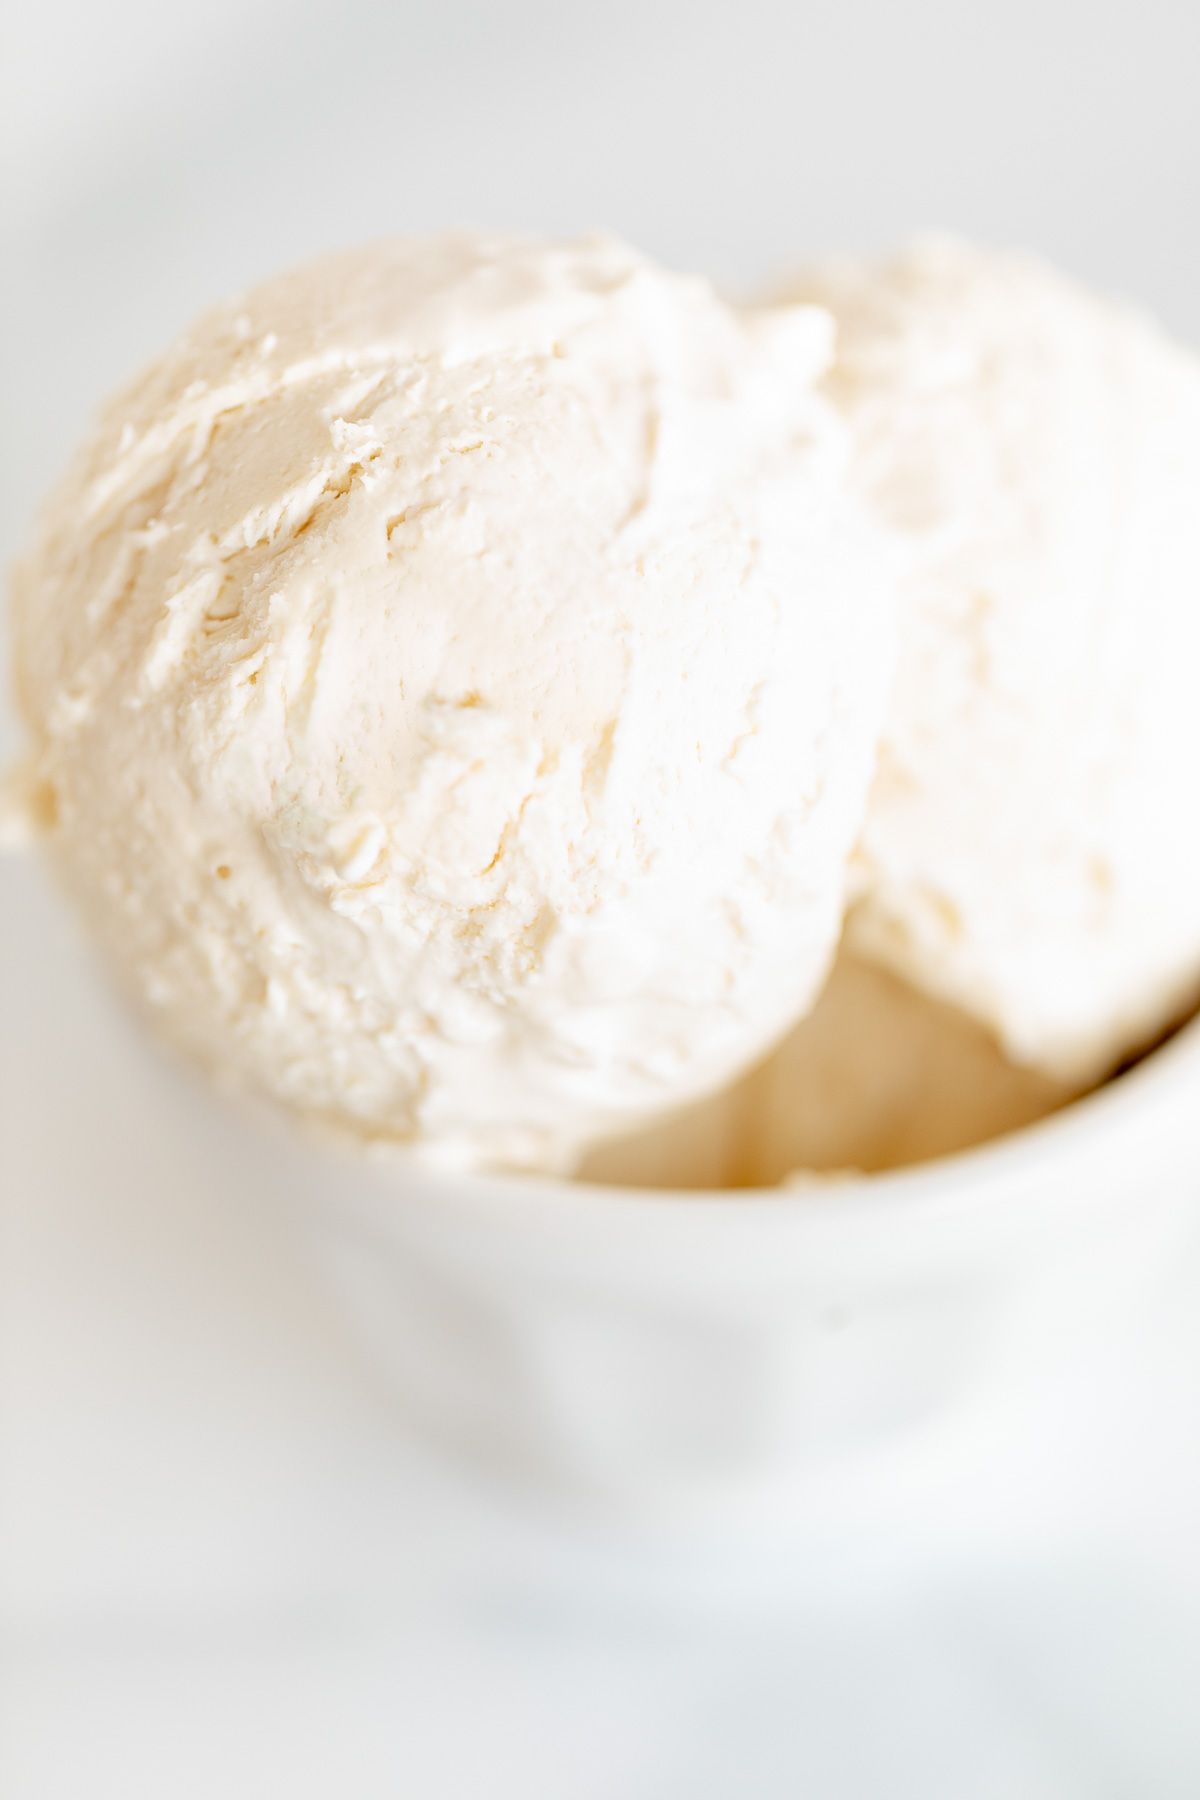 A white bowl on a marble surface, filled with frozen mascarpone ice cream